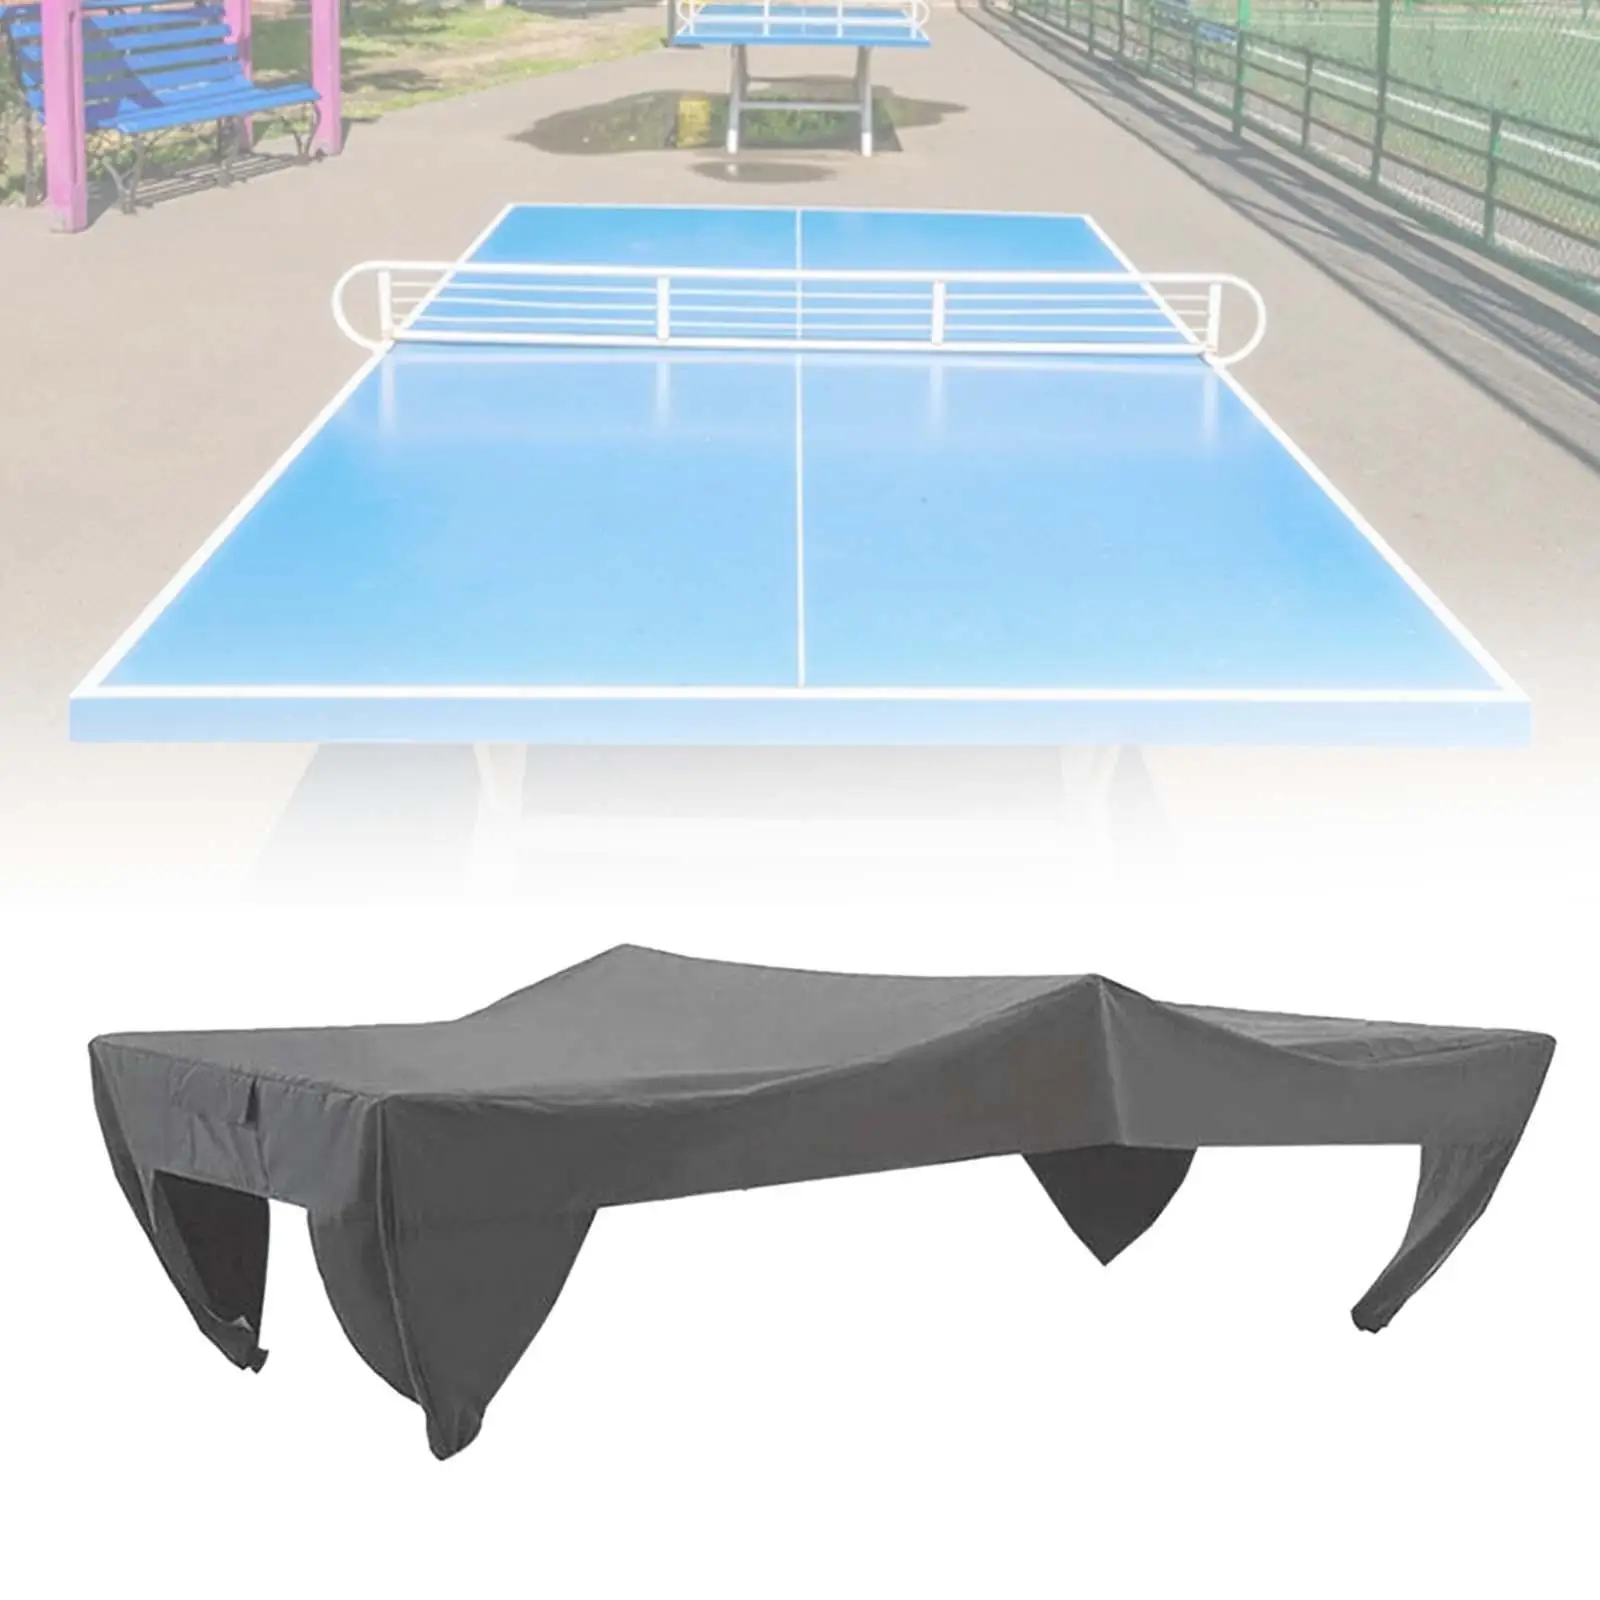 Table Tennis Cover Dust Cover Protective Cover Heavy Duty Reinforced Stitching Ping Pong Table Cover Premium for Ping Pong Table